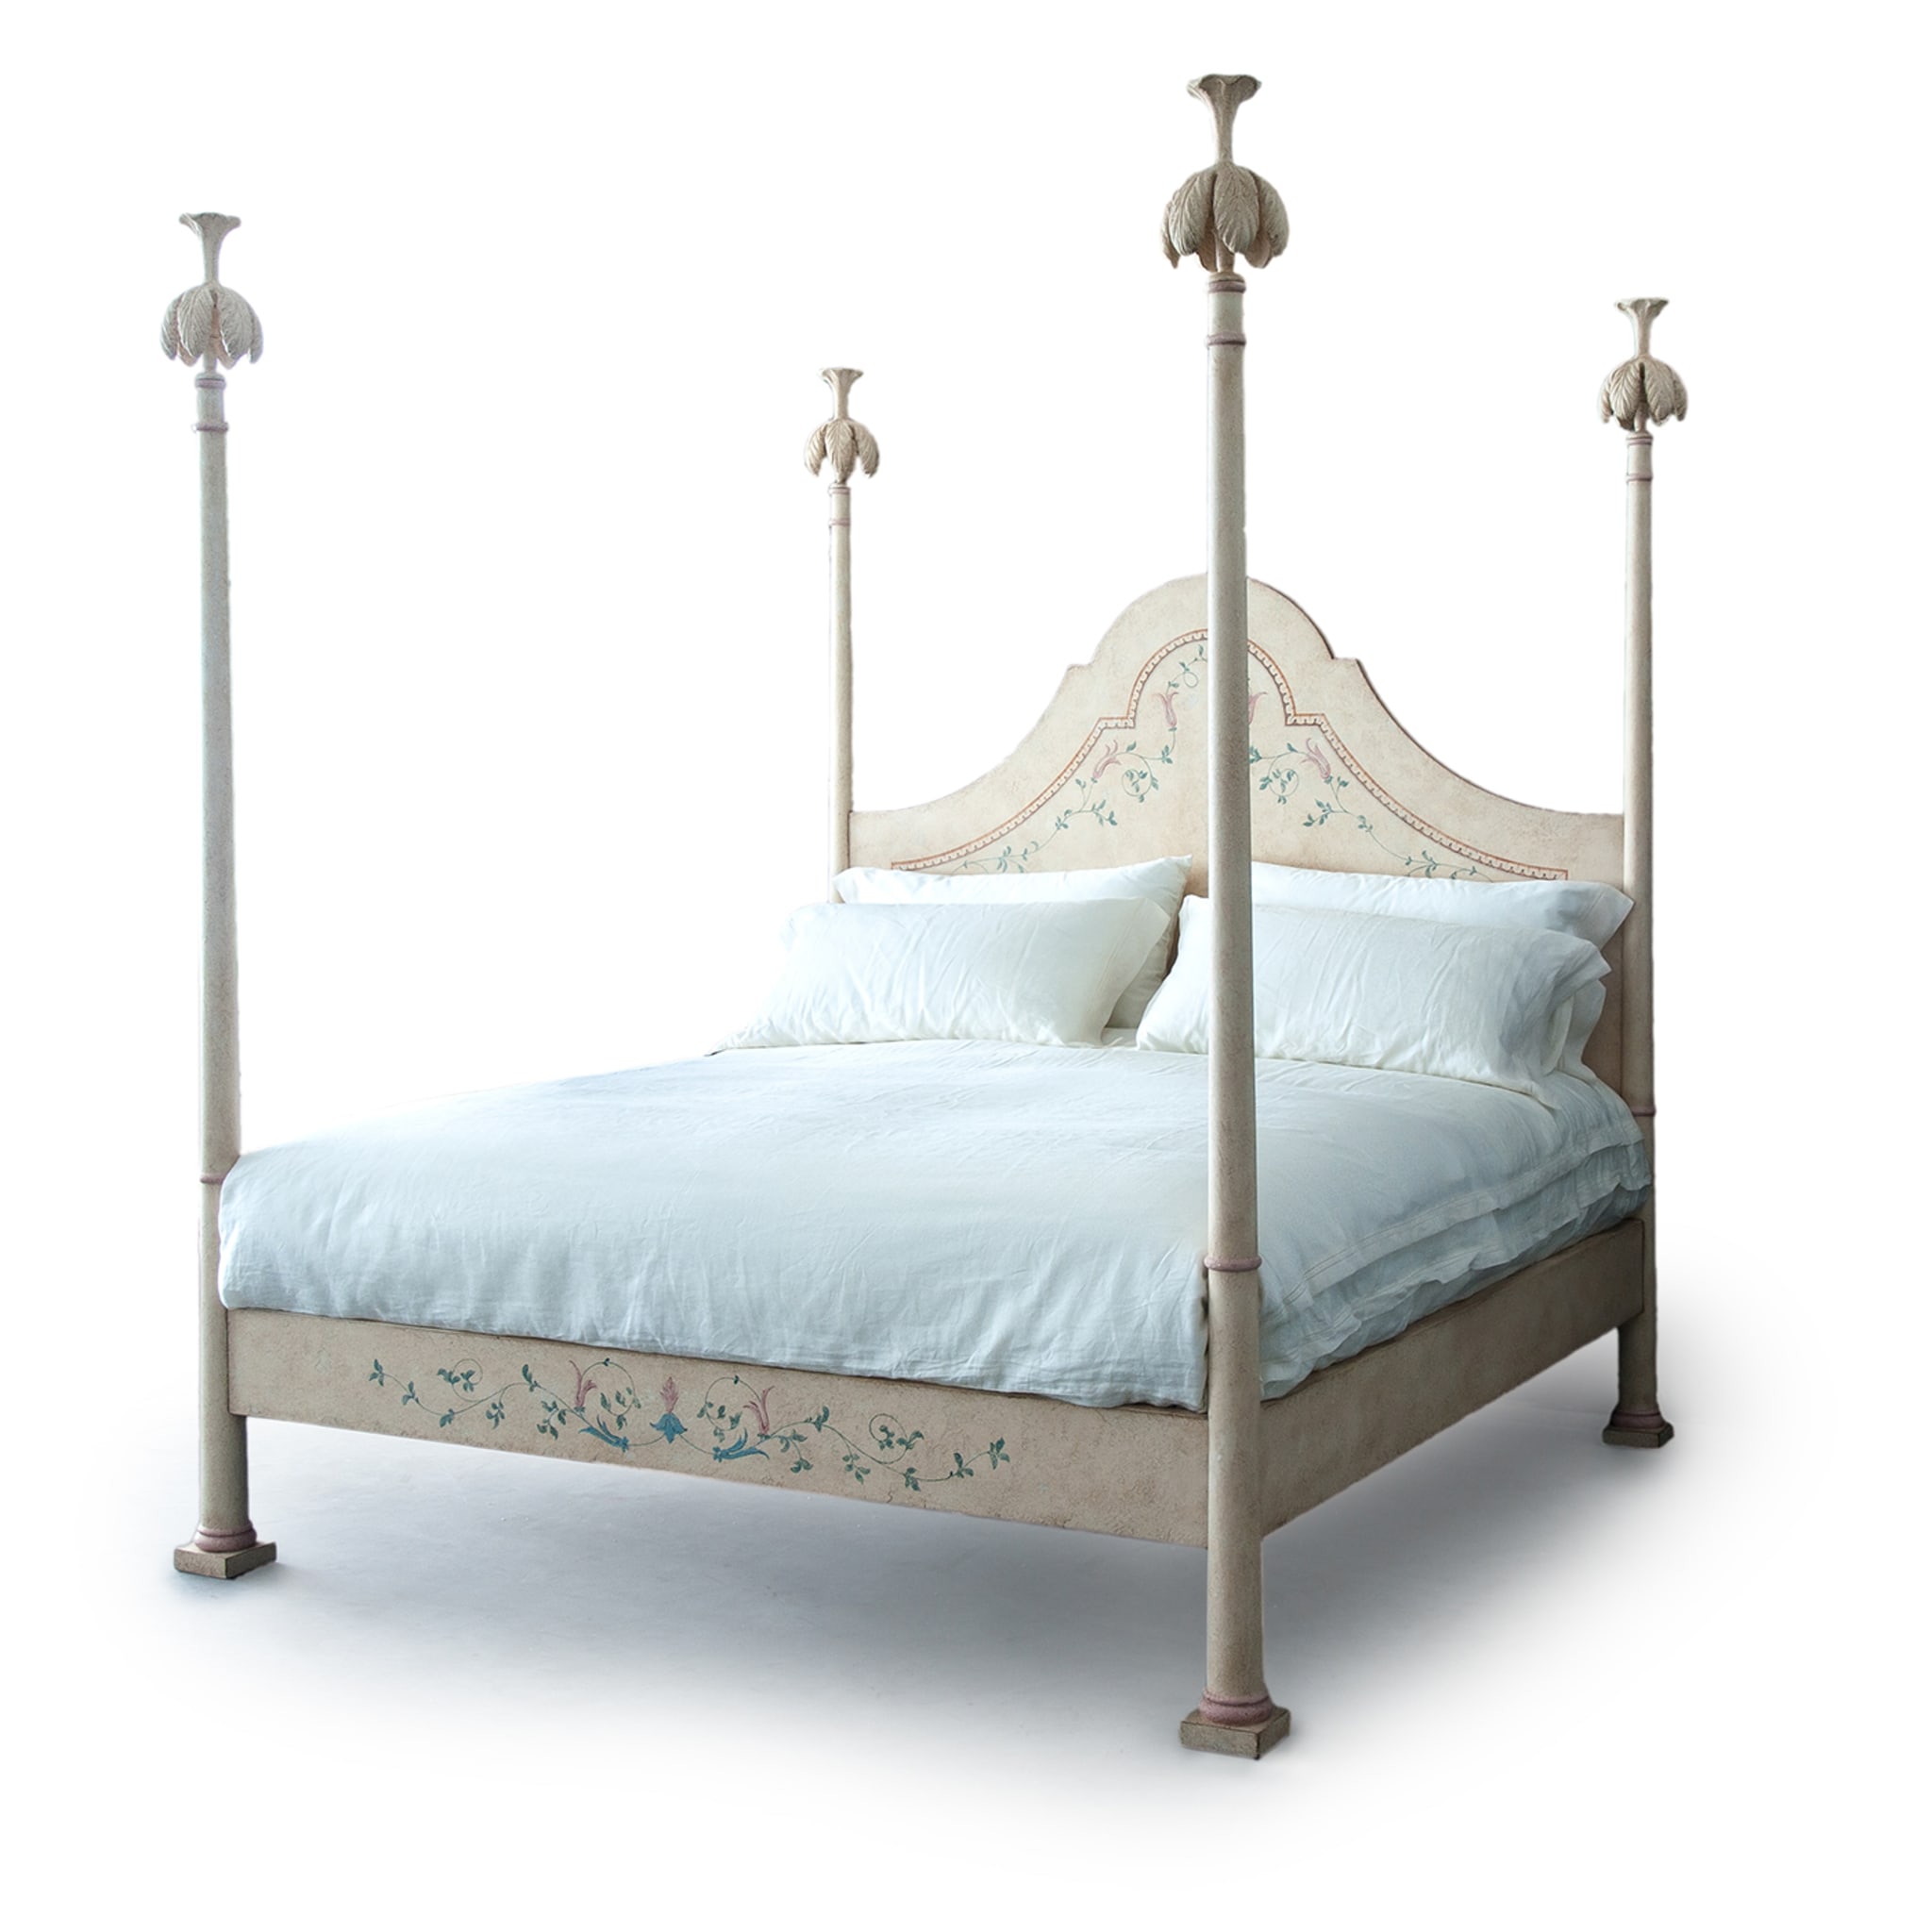 Roma Ivory King Size Bed - Alternative view 1